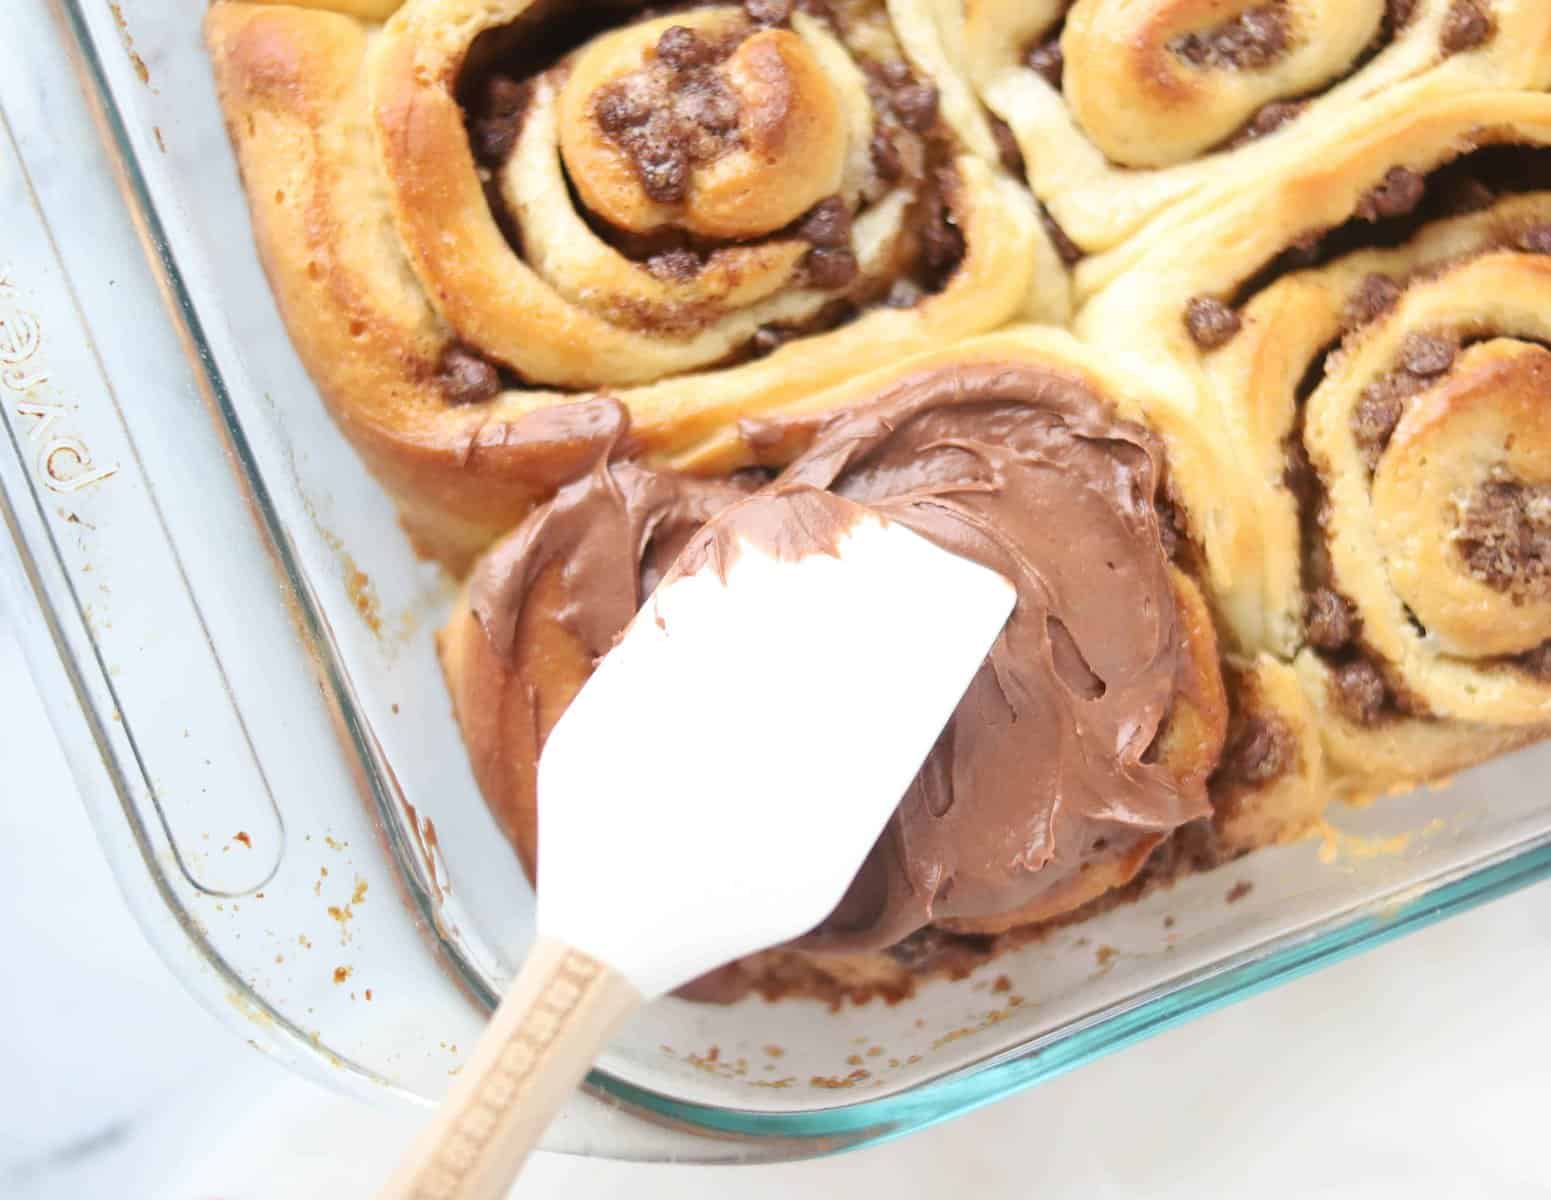 chocolate cream cheese frosting being spread onto baked cinnamon rolls